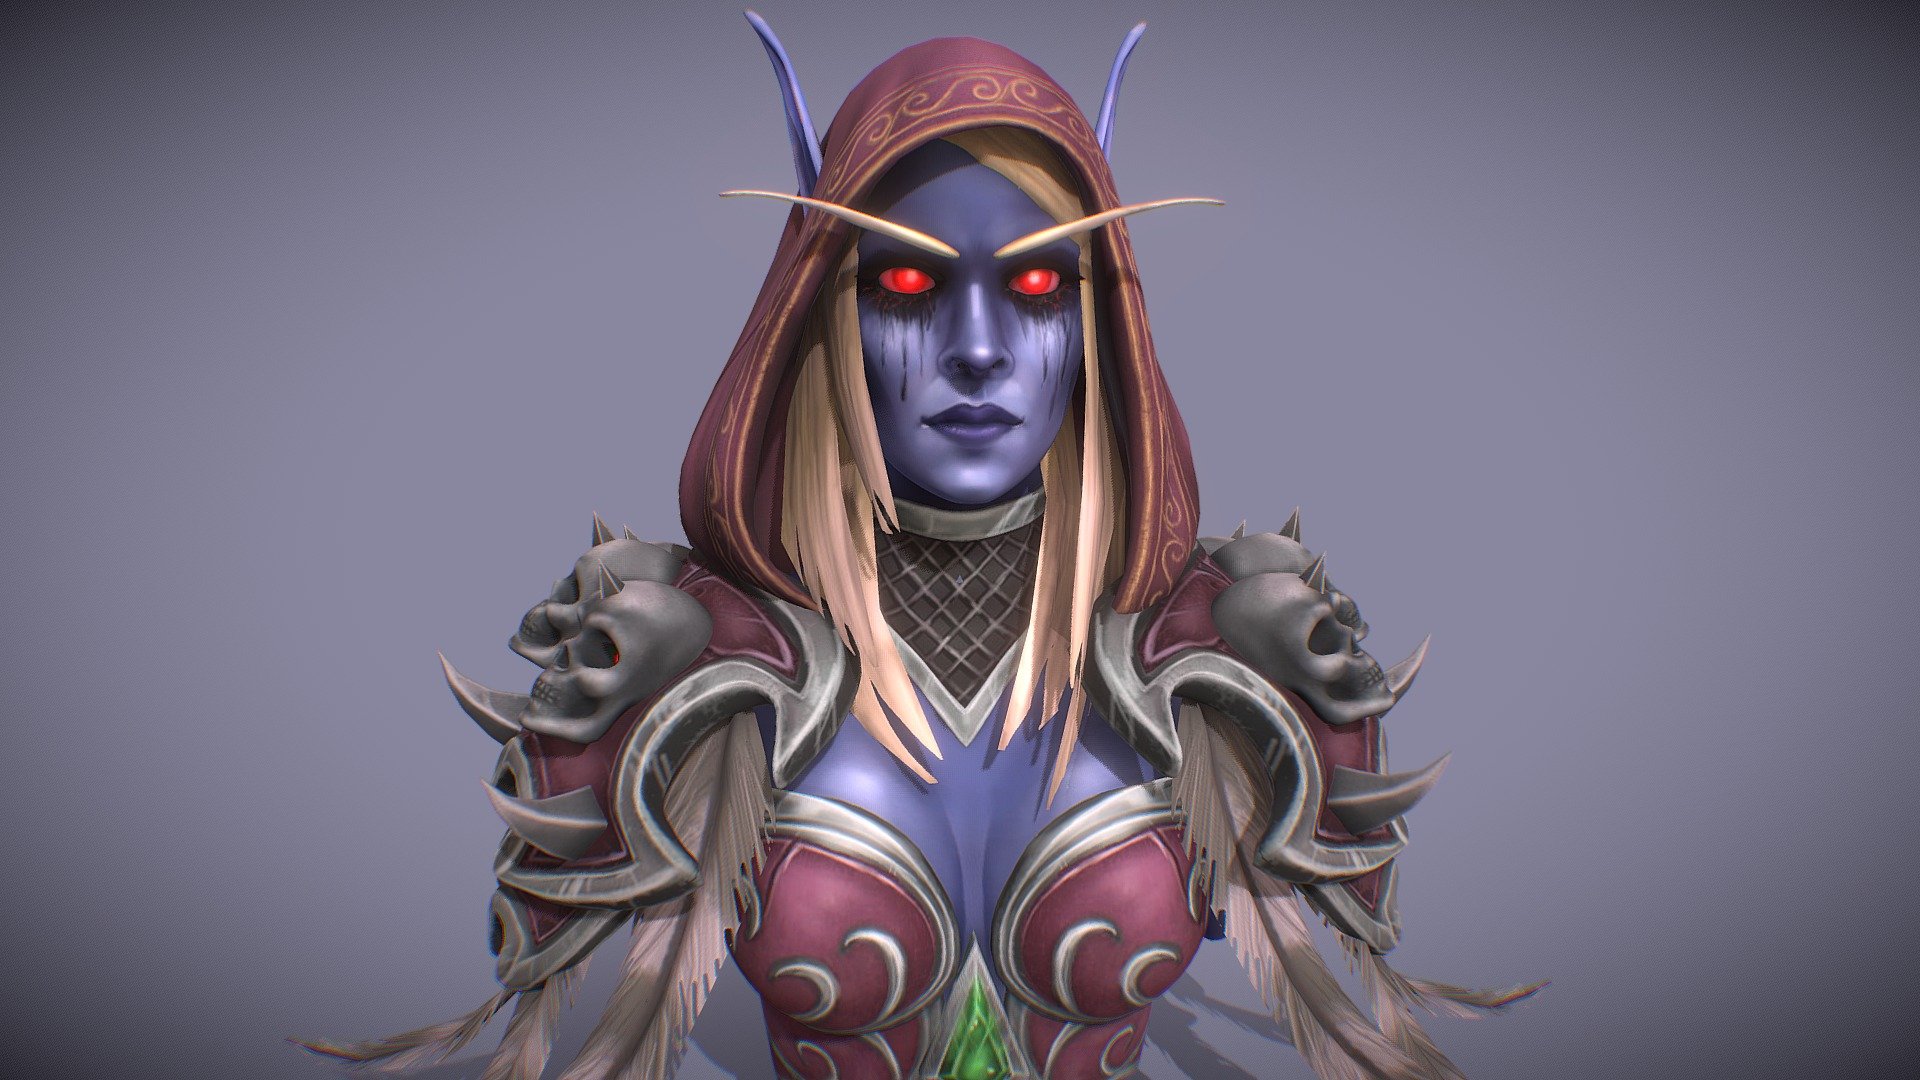 A little fan art bust of Sylvanas I've done for the 3D Bust Challenge. 
I really struggled to squeeze this in between uni work and other projects so it's a little rushed and there are a lot of things I want to change (and finish). Still, I'm happy I managed to get something done before the deadline and it surely was a fun project I learned quite a lot from!

Hopefully in the near future, I'll have some time to polish the textures and make a proper low poly model.

Software used: Zbrush, 3DS Max, Substance Painter - Sylvanas Windrunner Bust - 3D model by Ana Moldovan (@ana.moldovan) 3d model